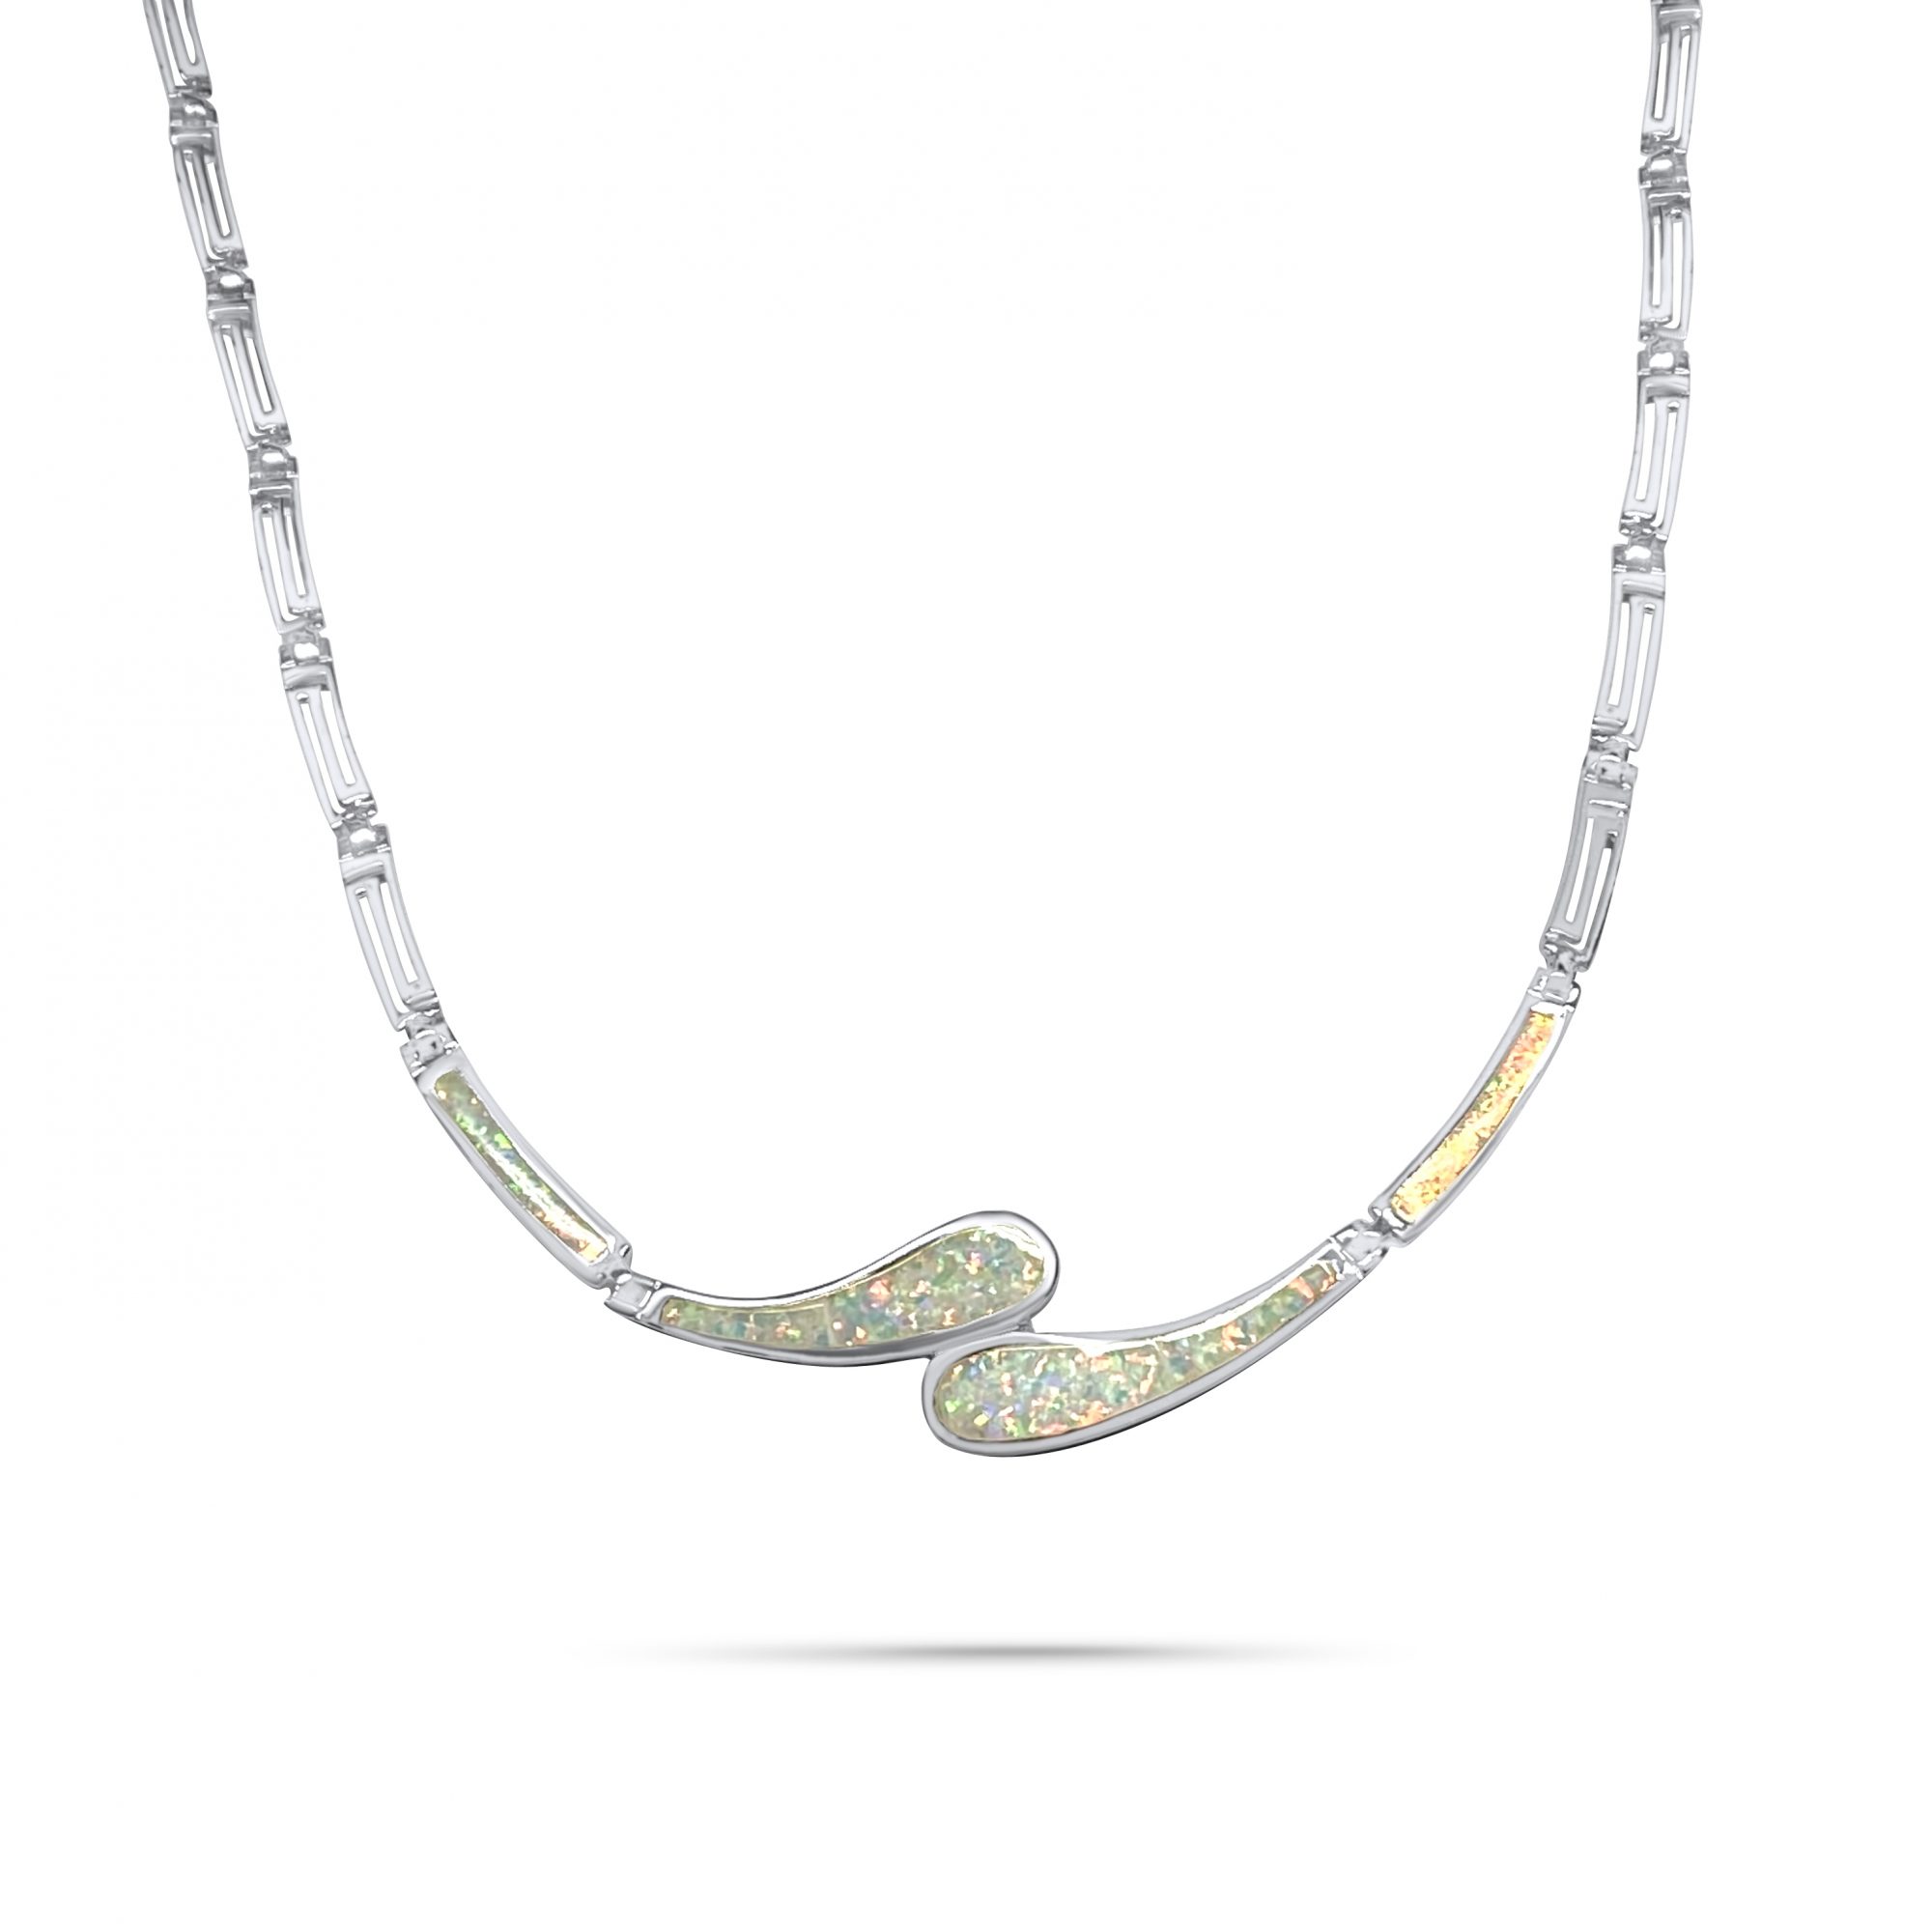 White opal necklace with meander